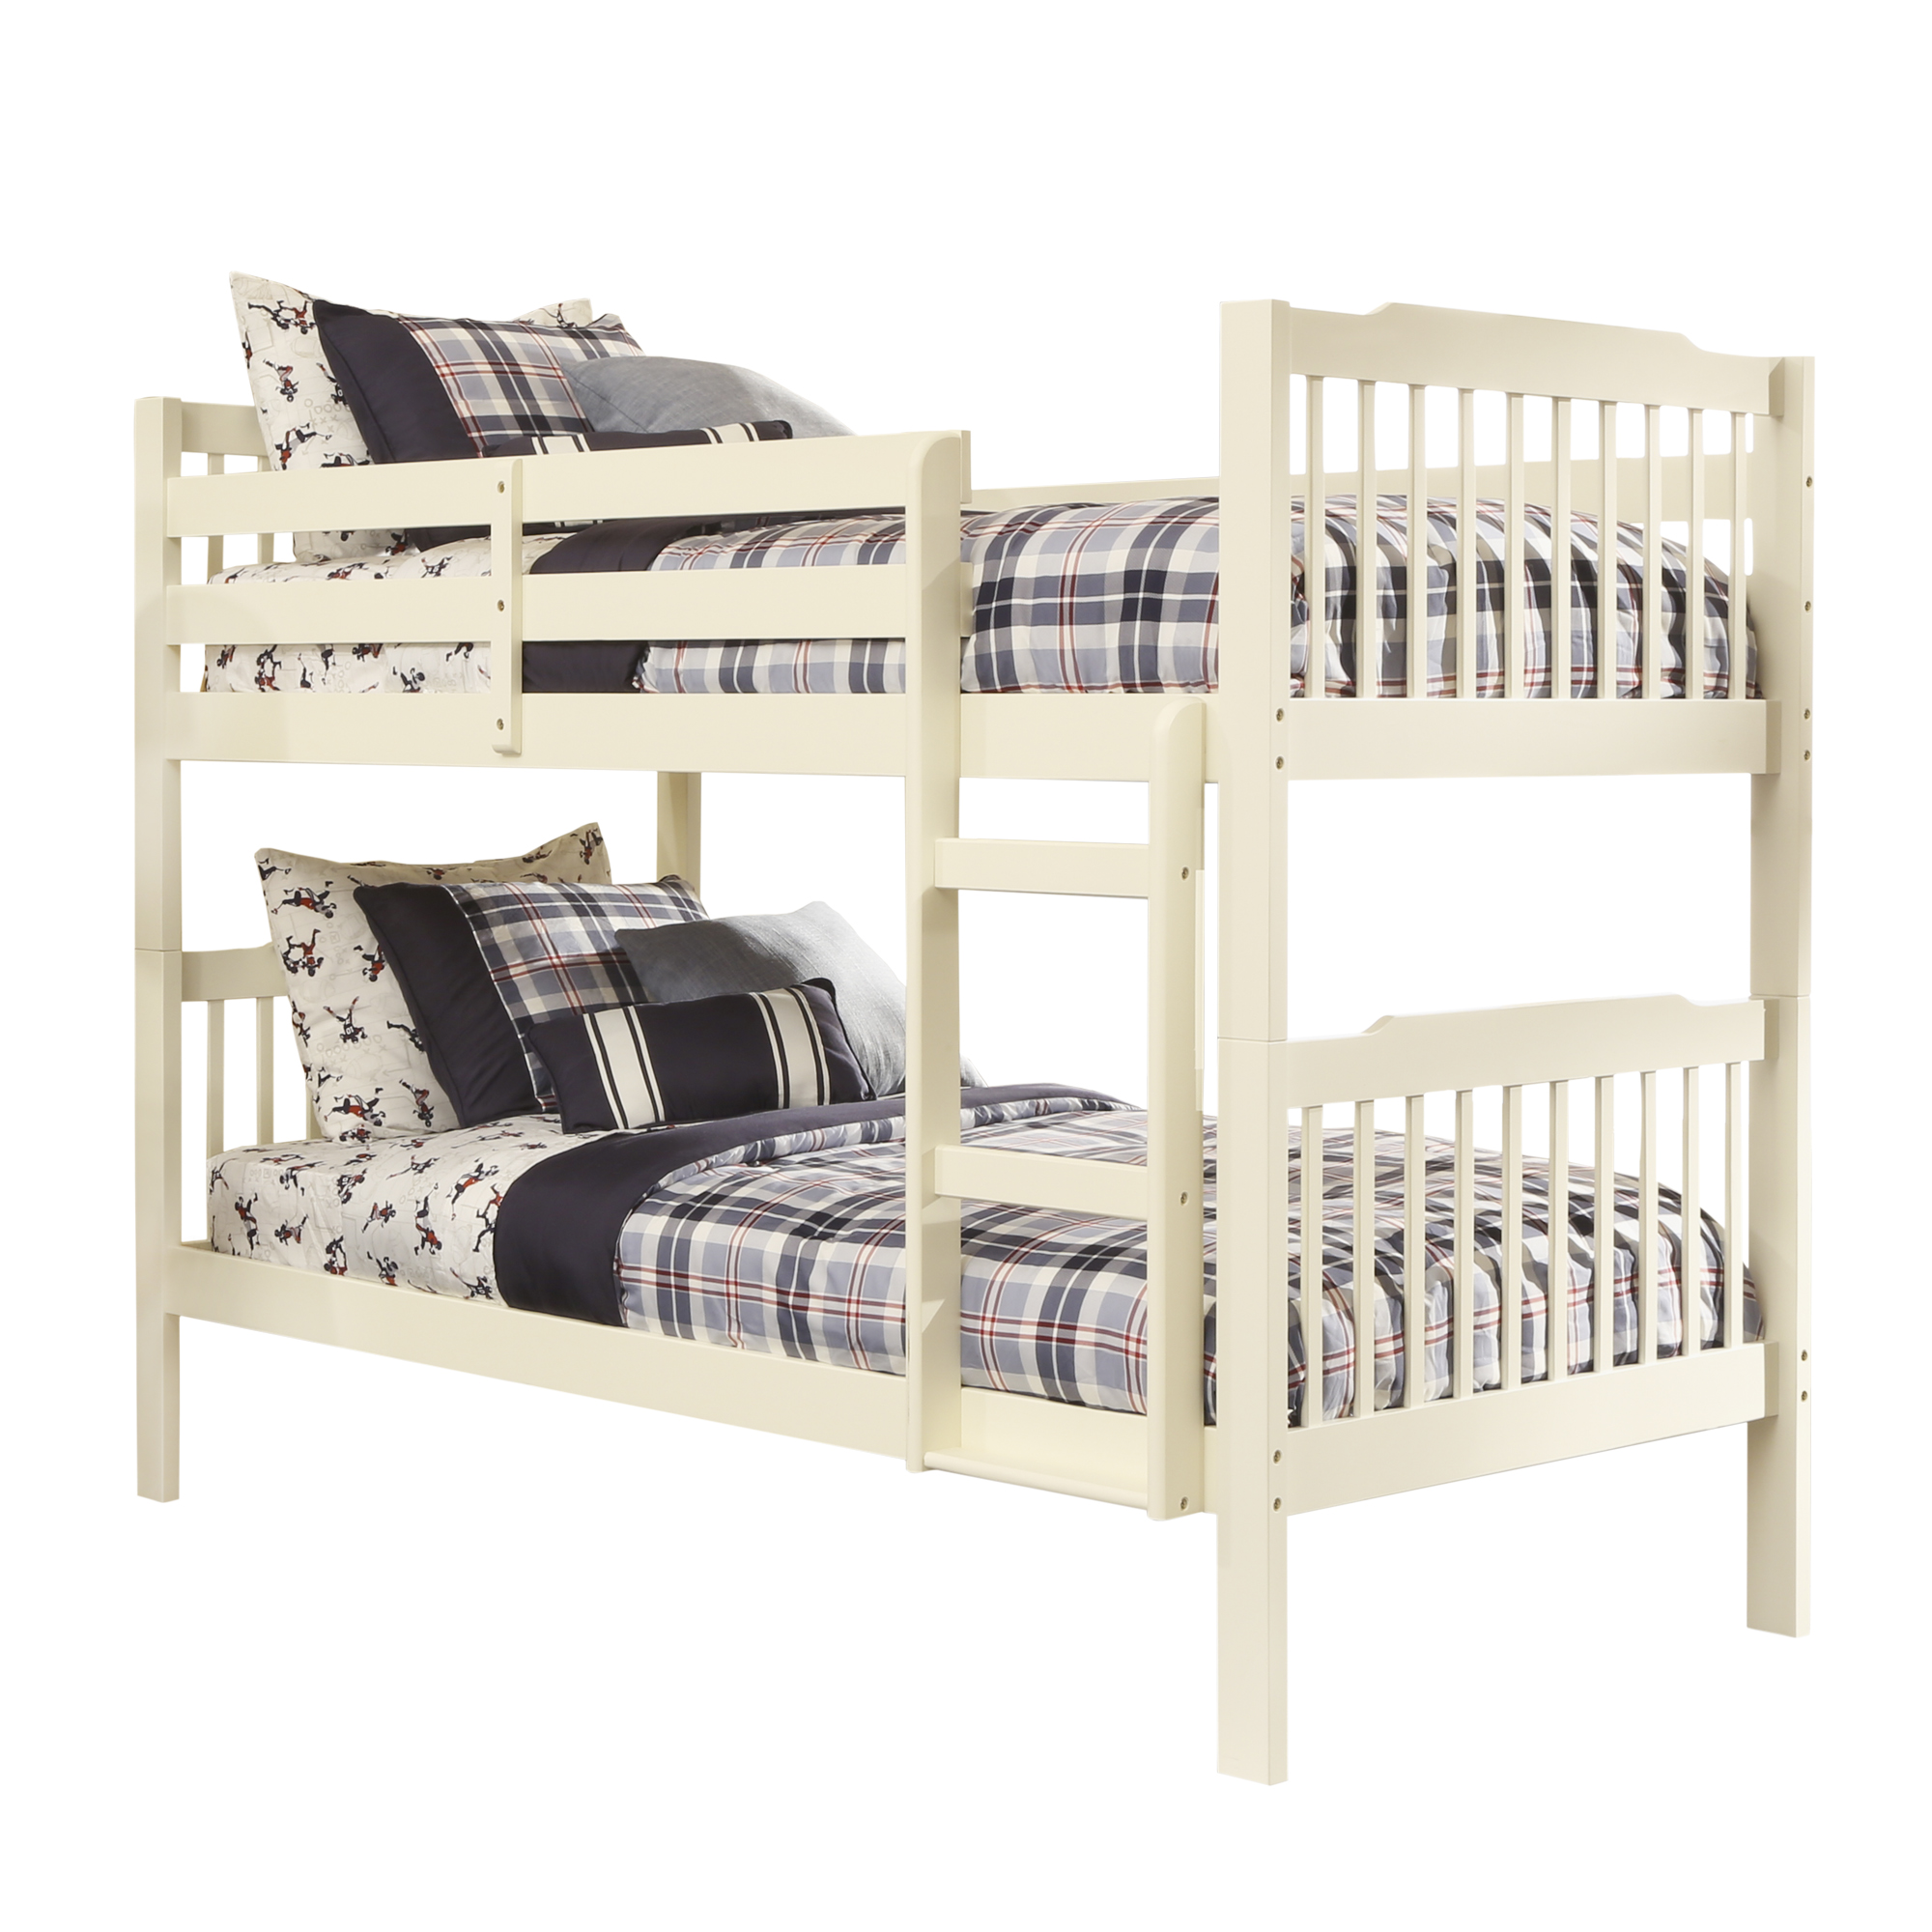 Chelsea Lane Elise Convertible Twin Over Twin Wood Bunk Bed, White - image 2 of 5